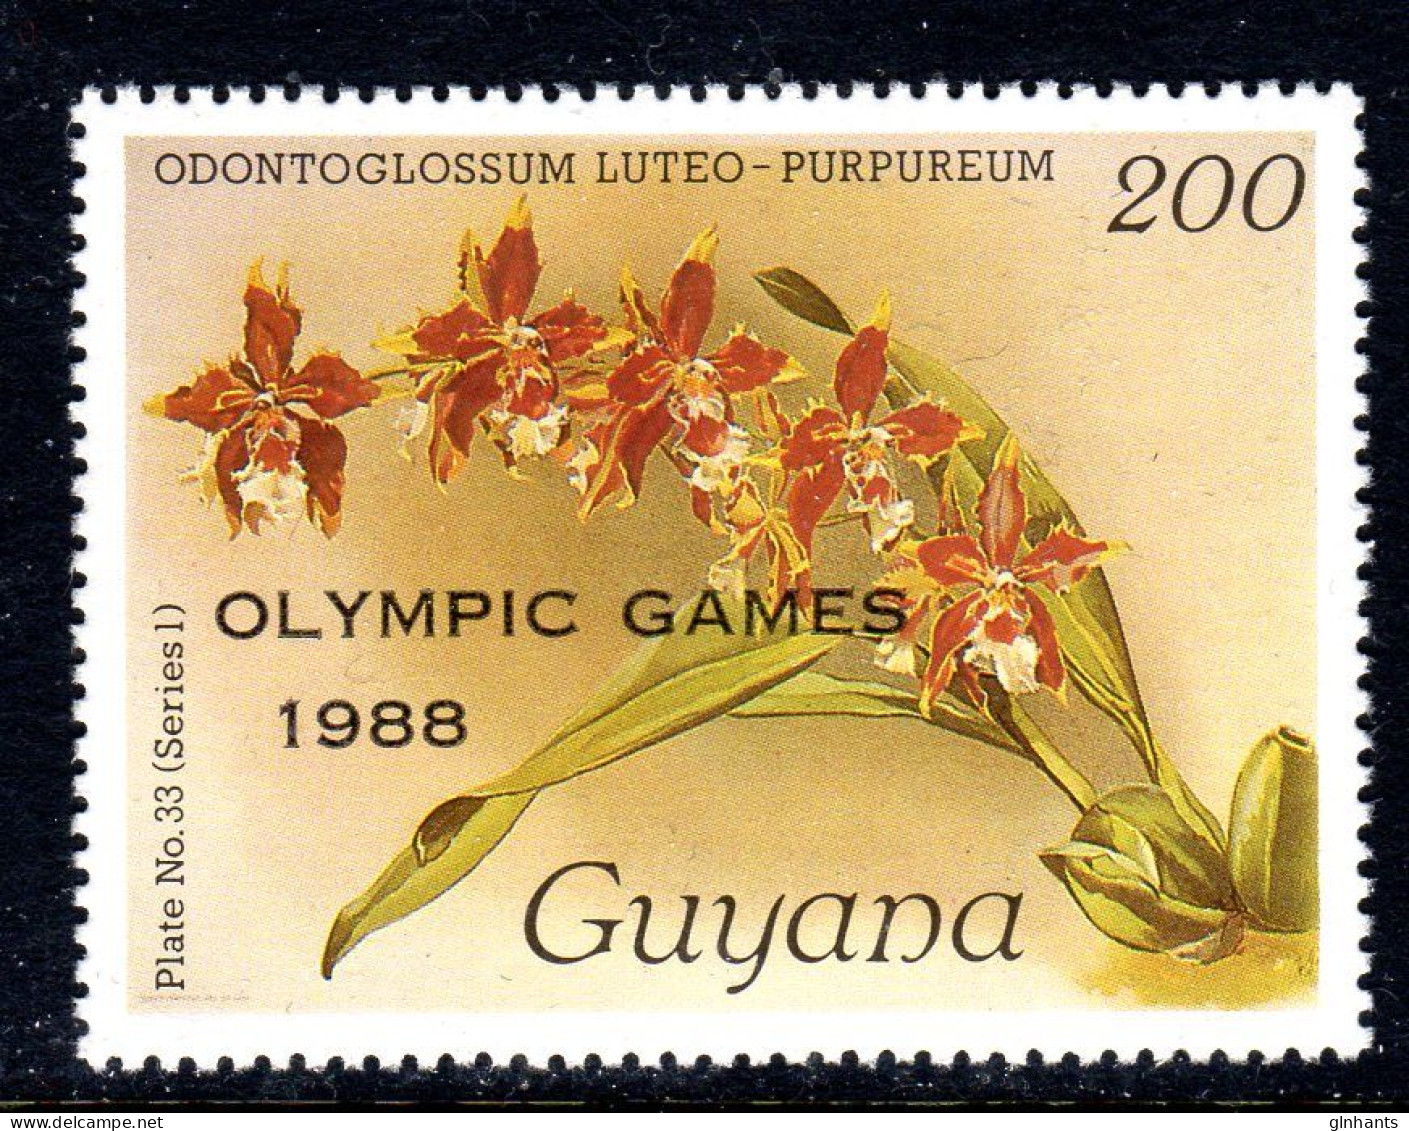 GUYANA - 1989 REICHENBACHIA ORCHIDS OVERPRINTED OLYMPIC GAMES PLATE 33 SERIES 1 FINE MNH ** SG 2479 - Guyane (1966-...)